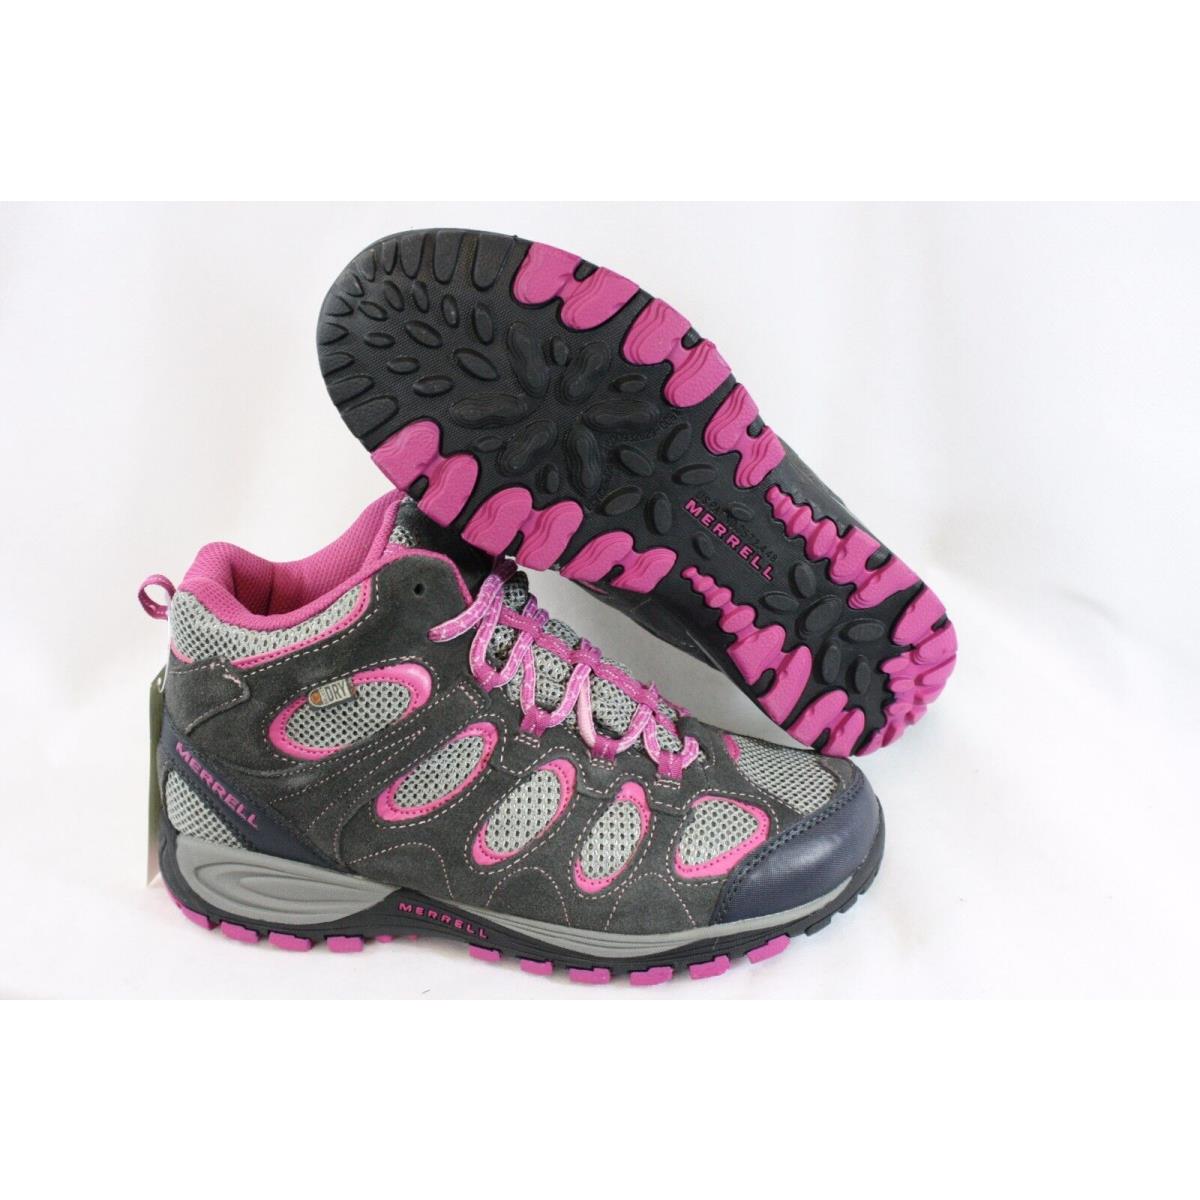 Kids Girls Youth Merrell Hilltop Ventilator Mid Grey Pink Sneakers Shoes Boots